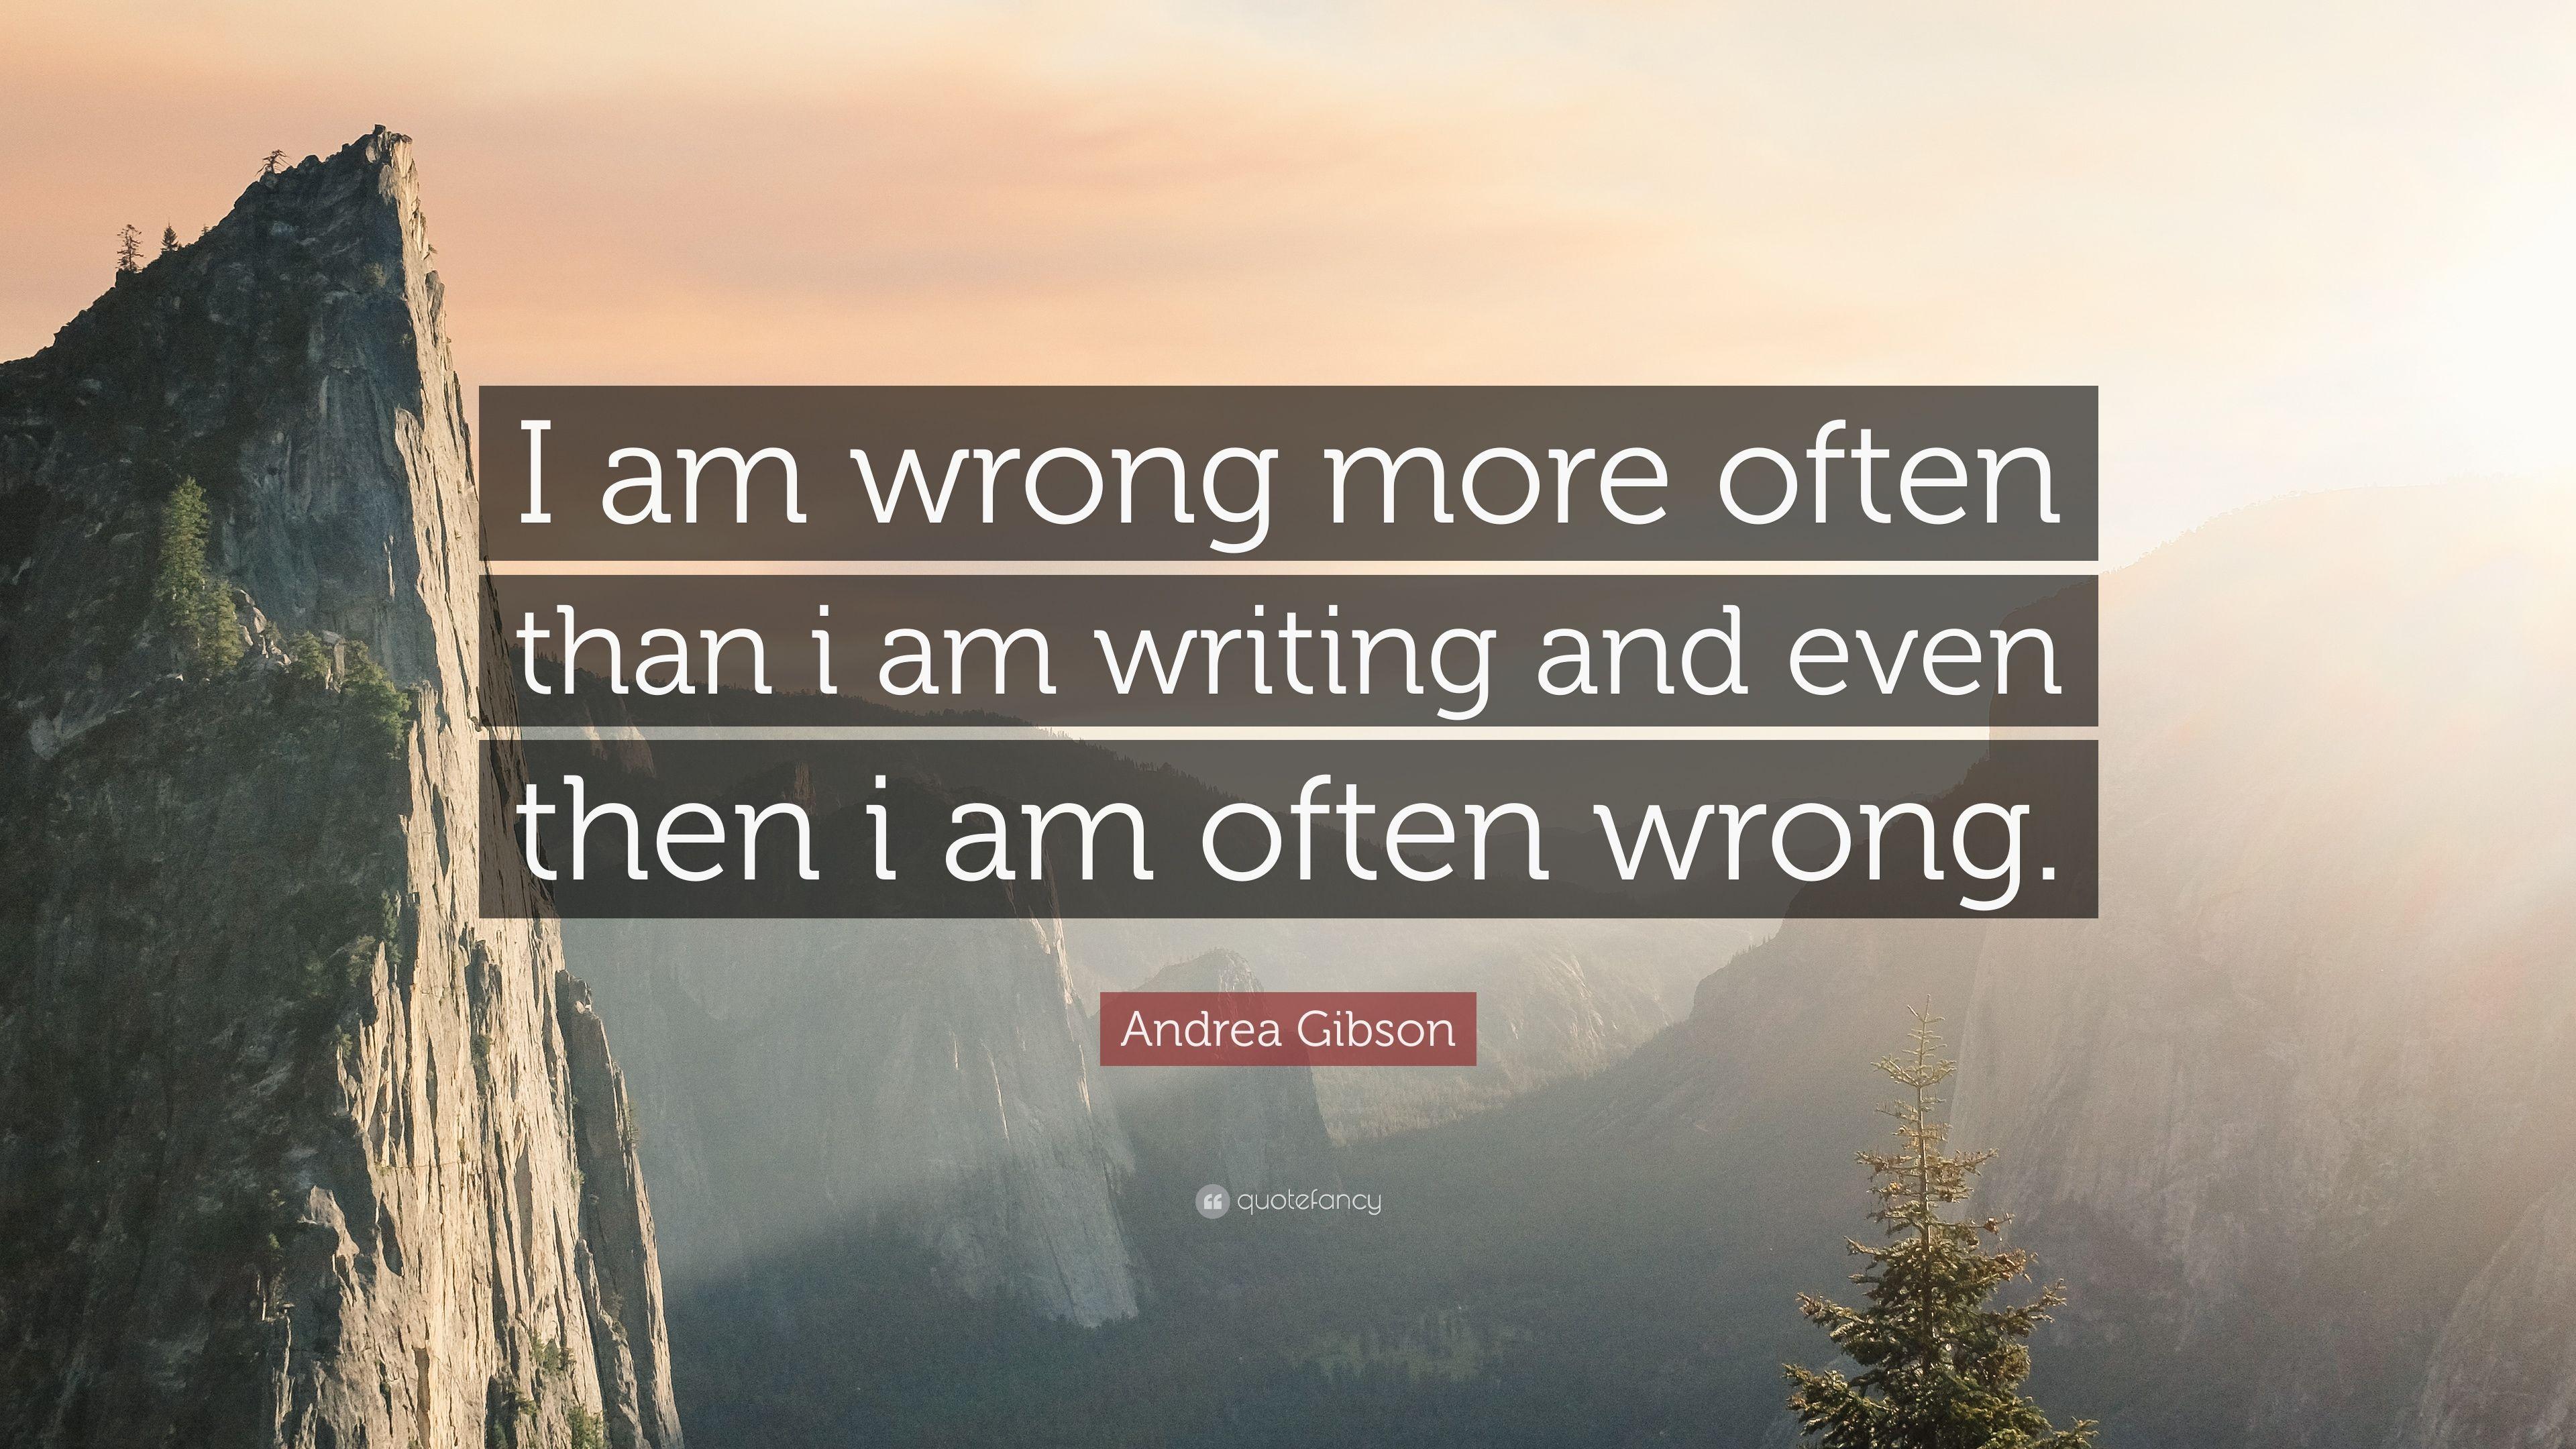 Andrea Gibson Quote: “I am wrong more often than i am writing